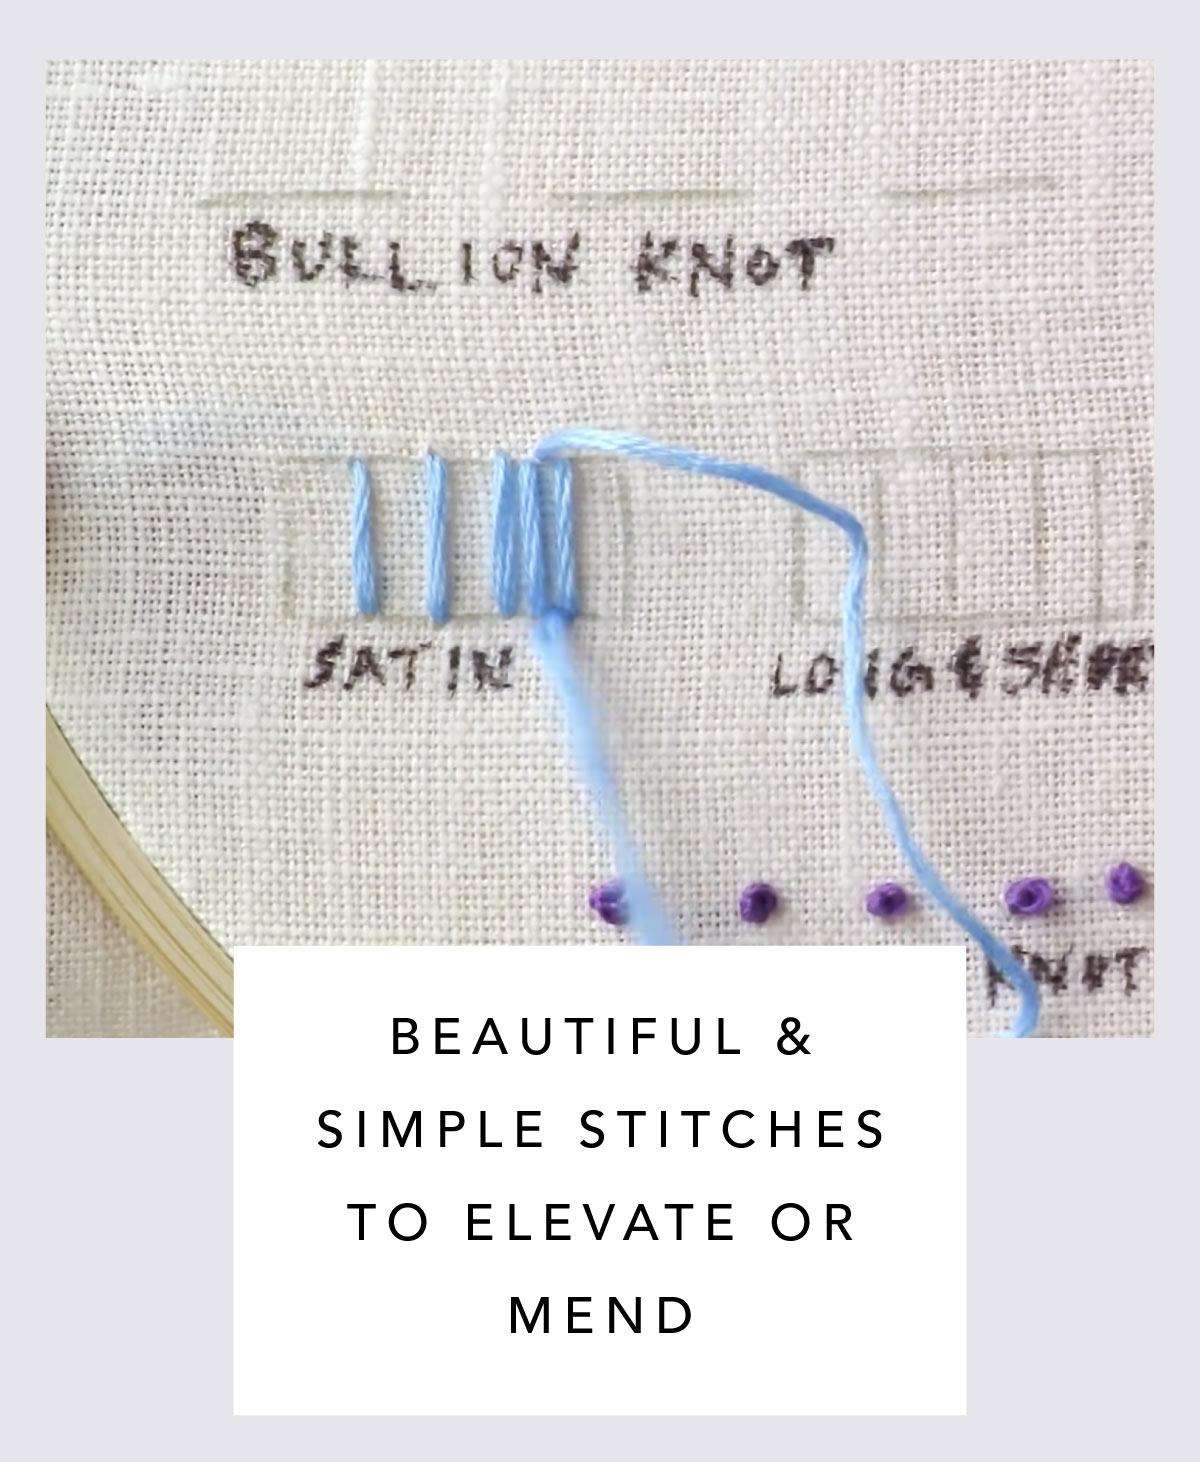 Simple stitches for embroidery